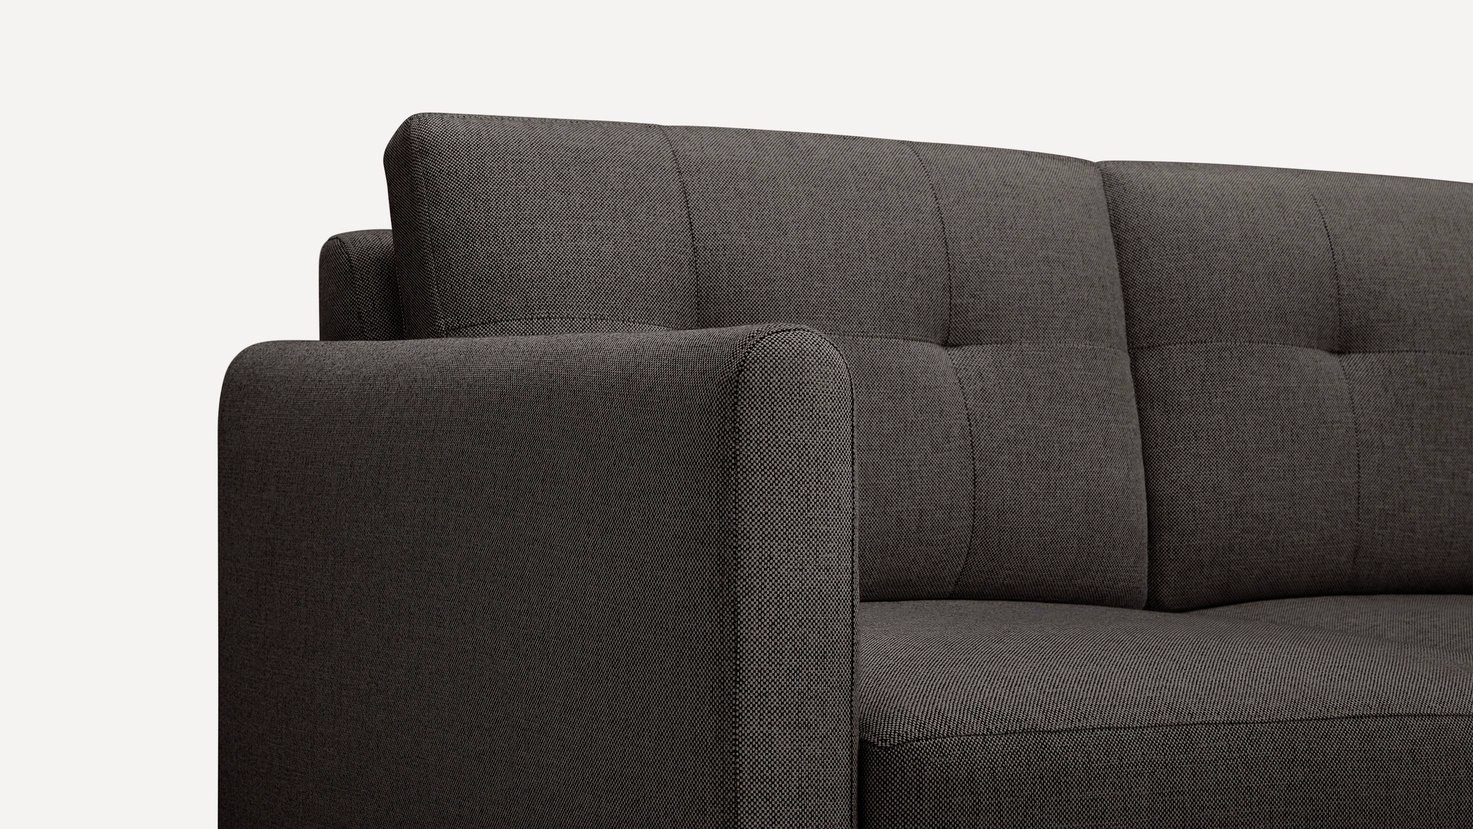 Arch Nomad Sofa in Charcoal - Image 1